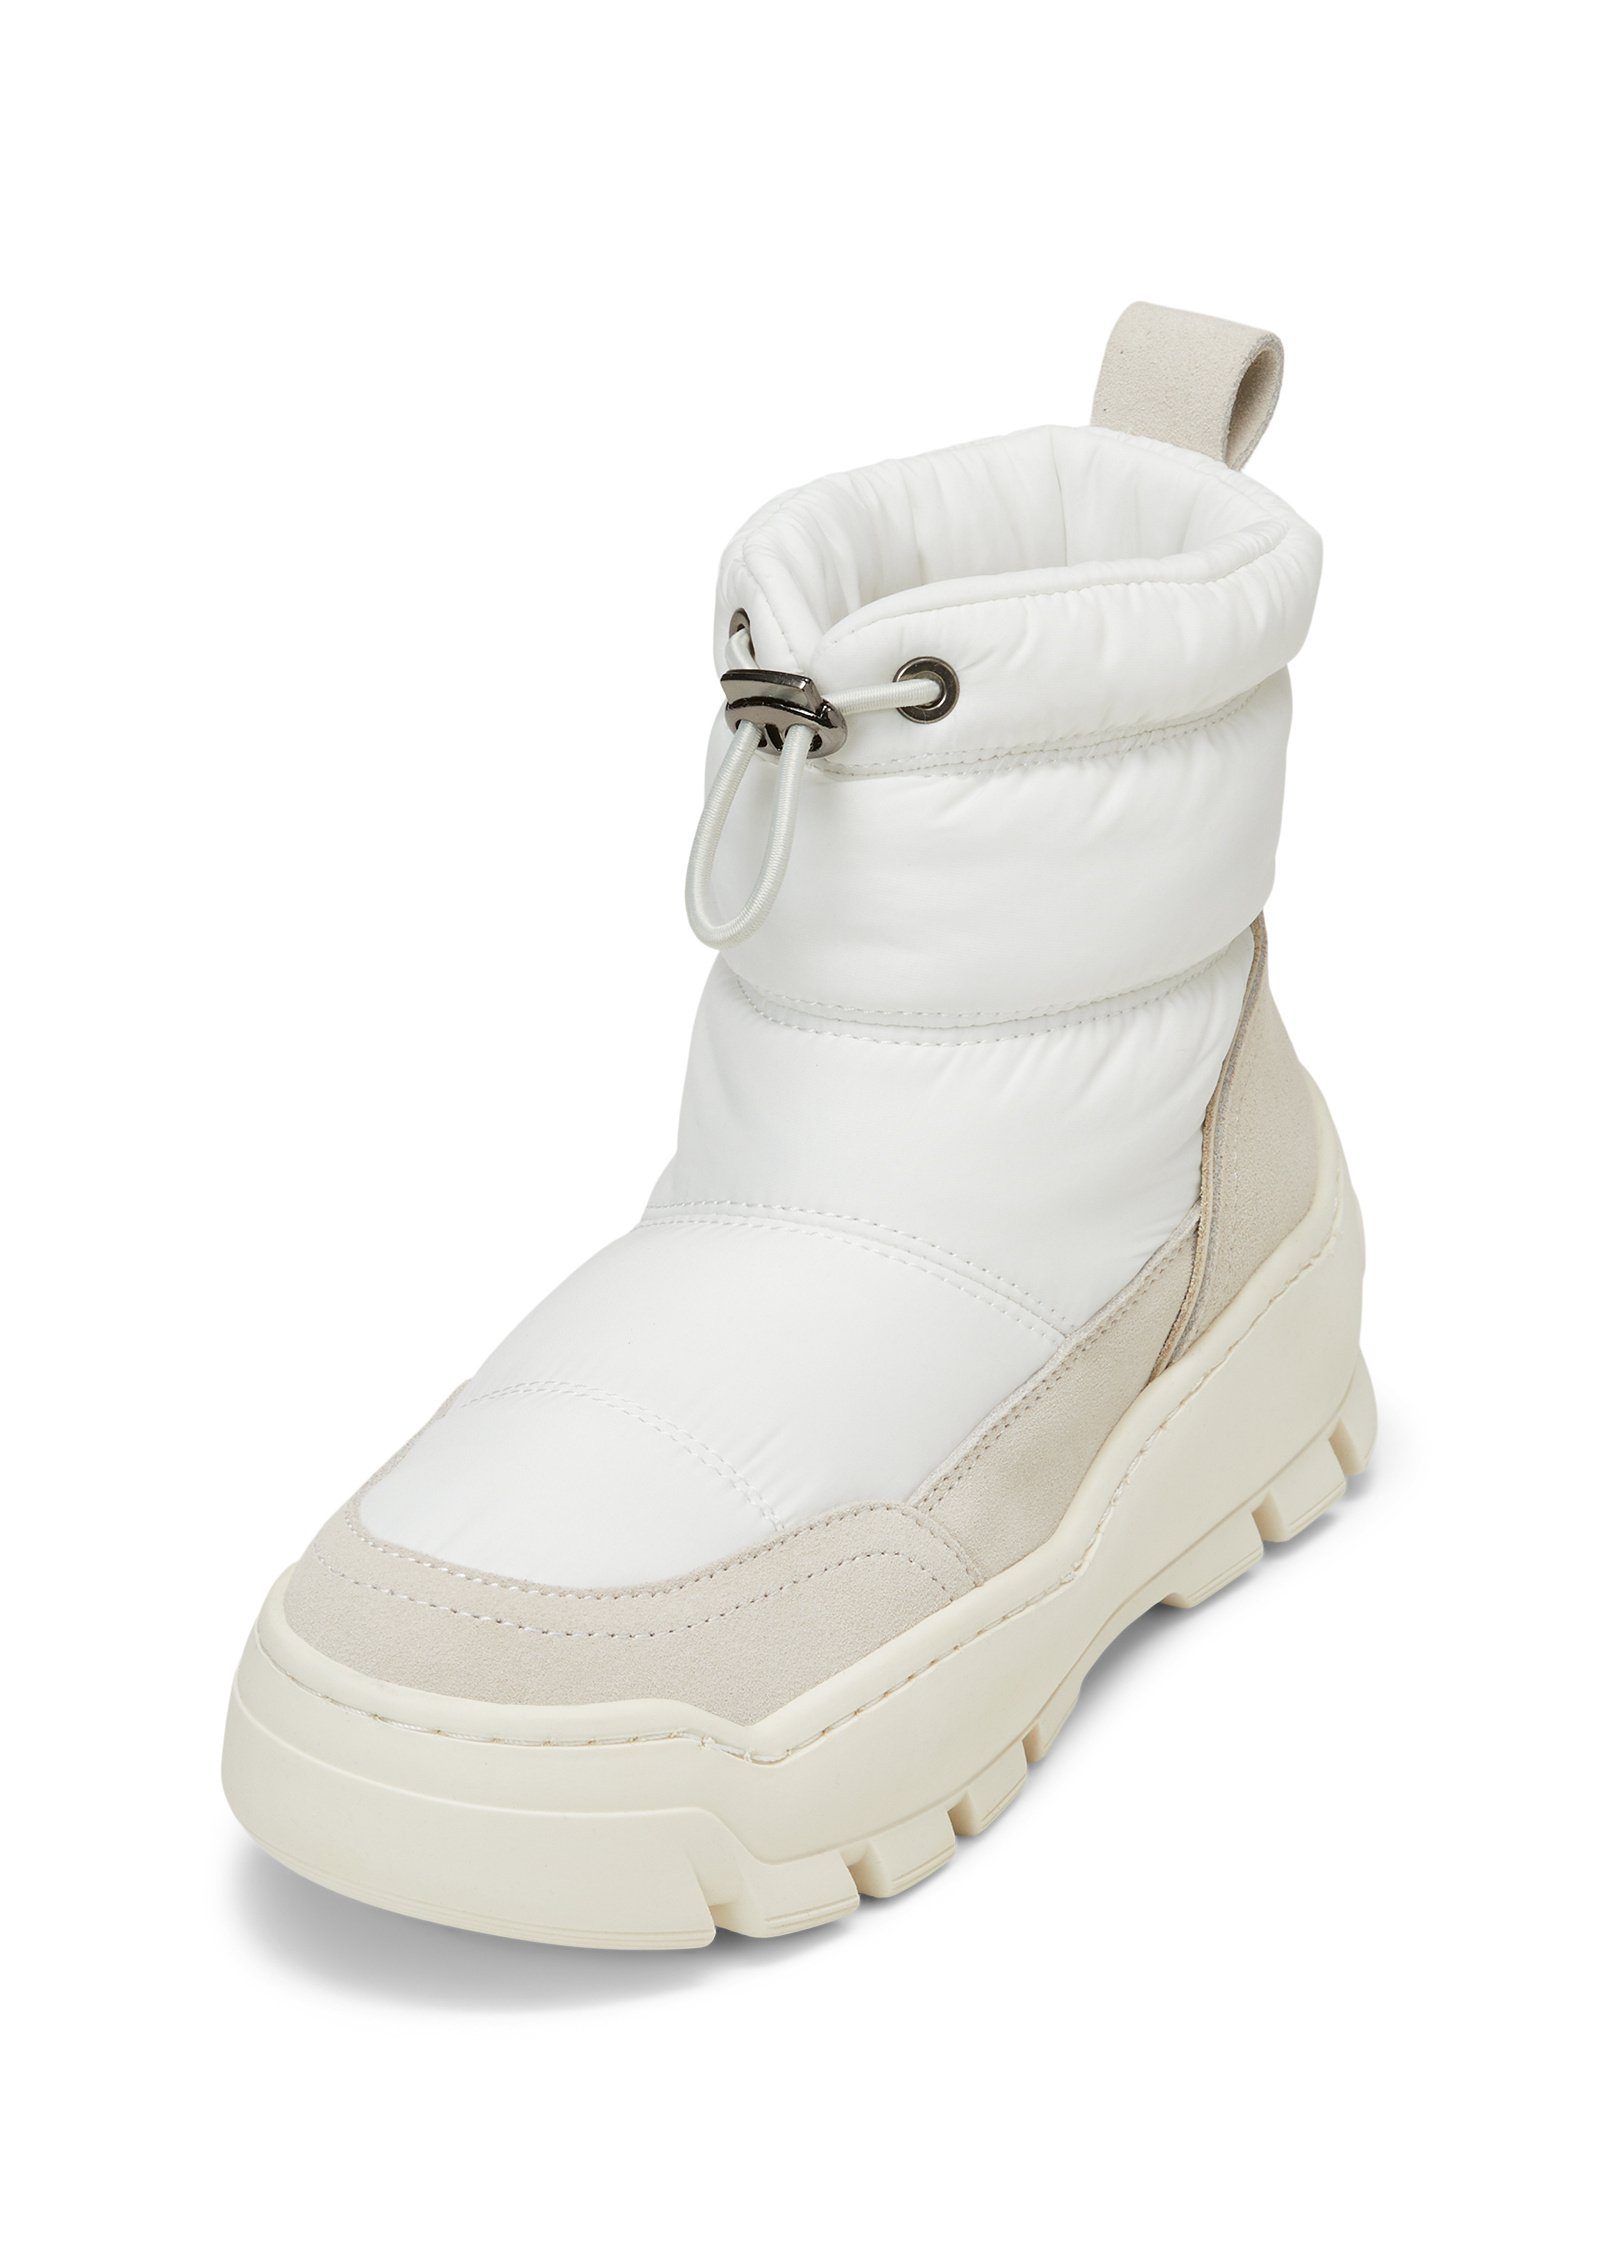 weiß Polyester aus Marc O'Polo recyceltem Winterboots